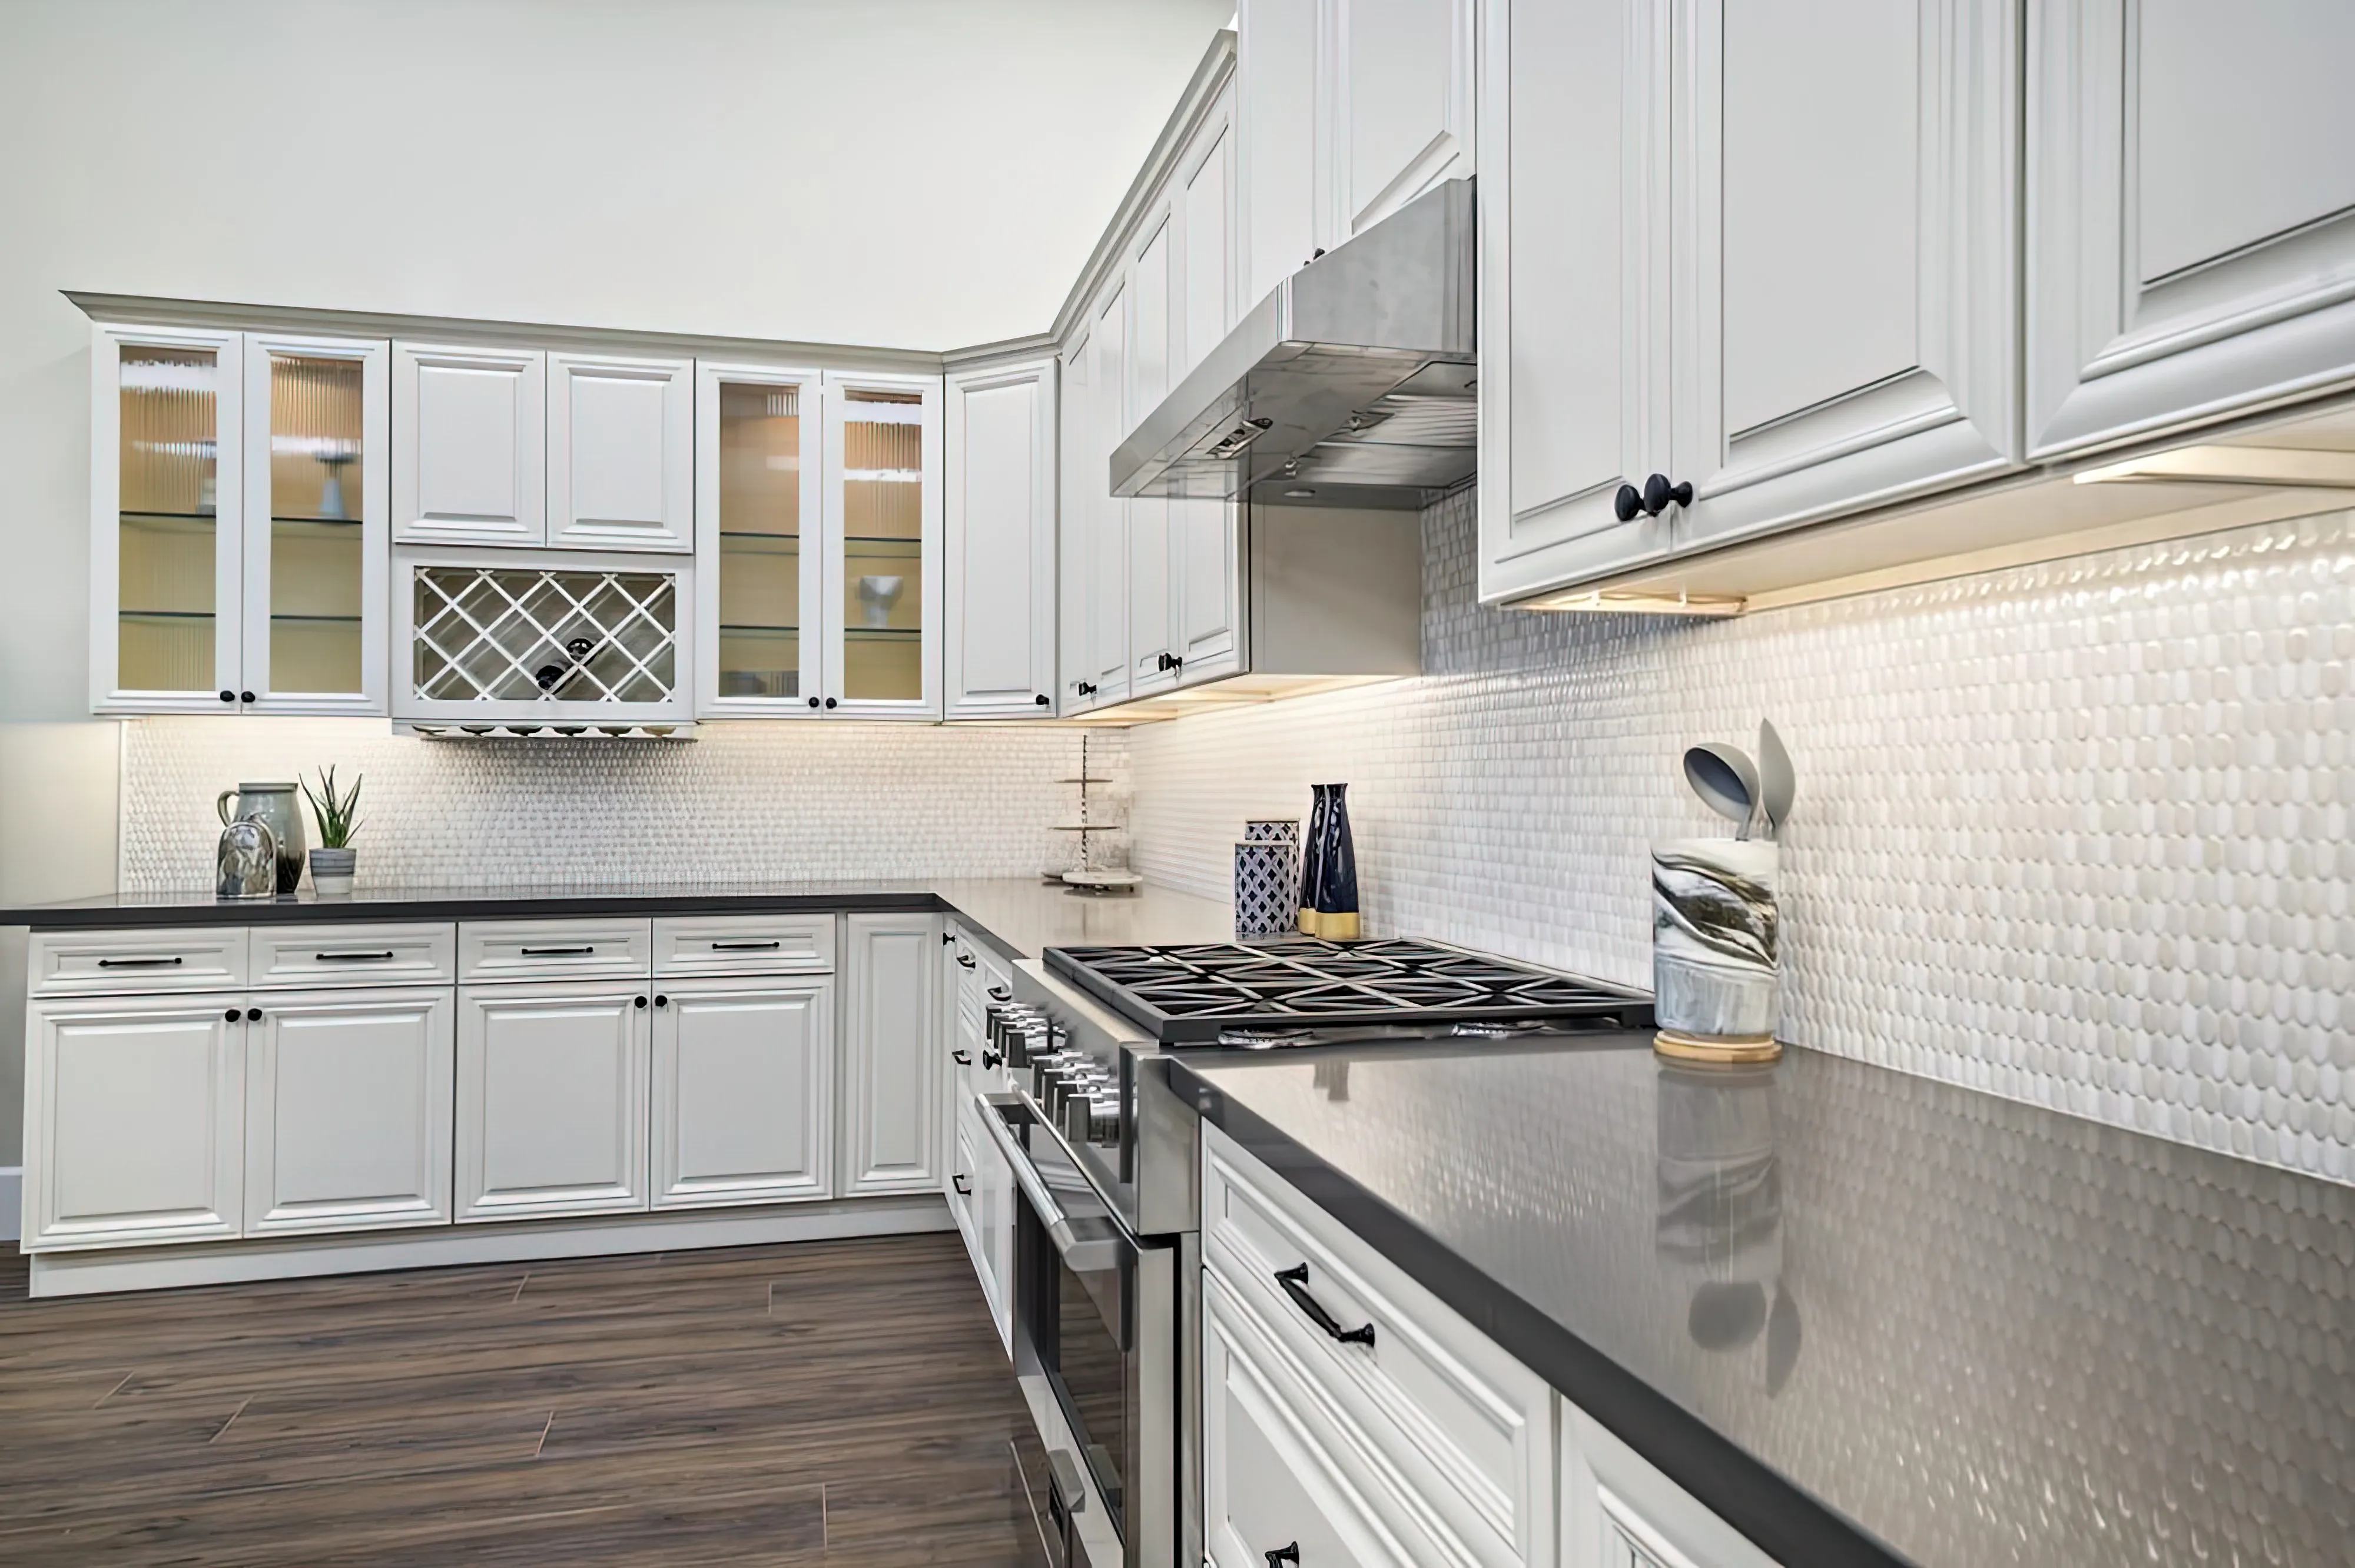 A typically preferred kitchen layout is L-shaped. It features stations on both adjacent walls that run perpendicular to one another. This design works well when there are two people in the kitchen because the workspace is roomy and pleasant 